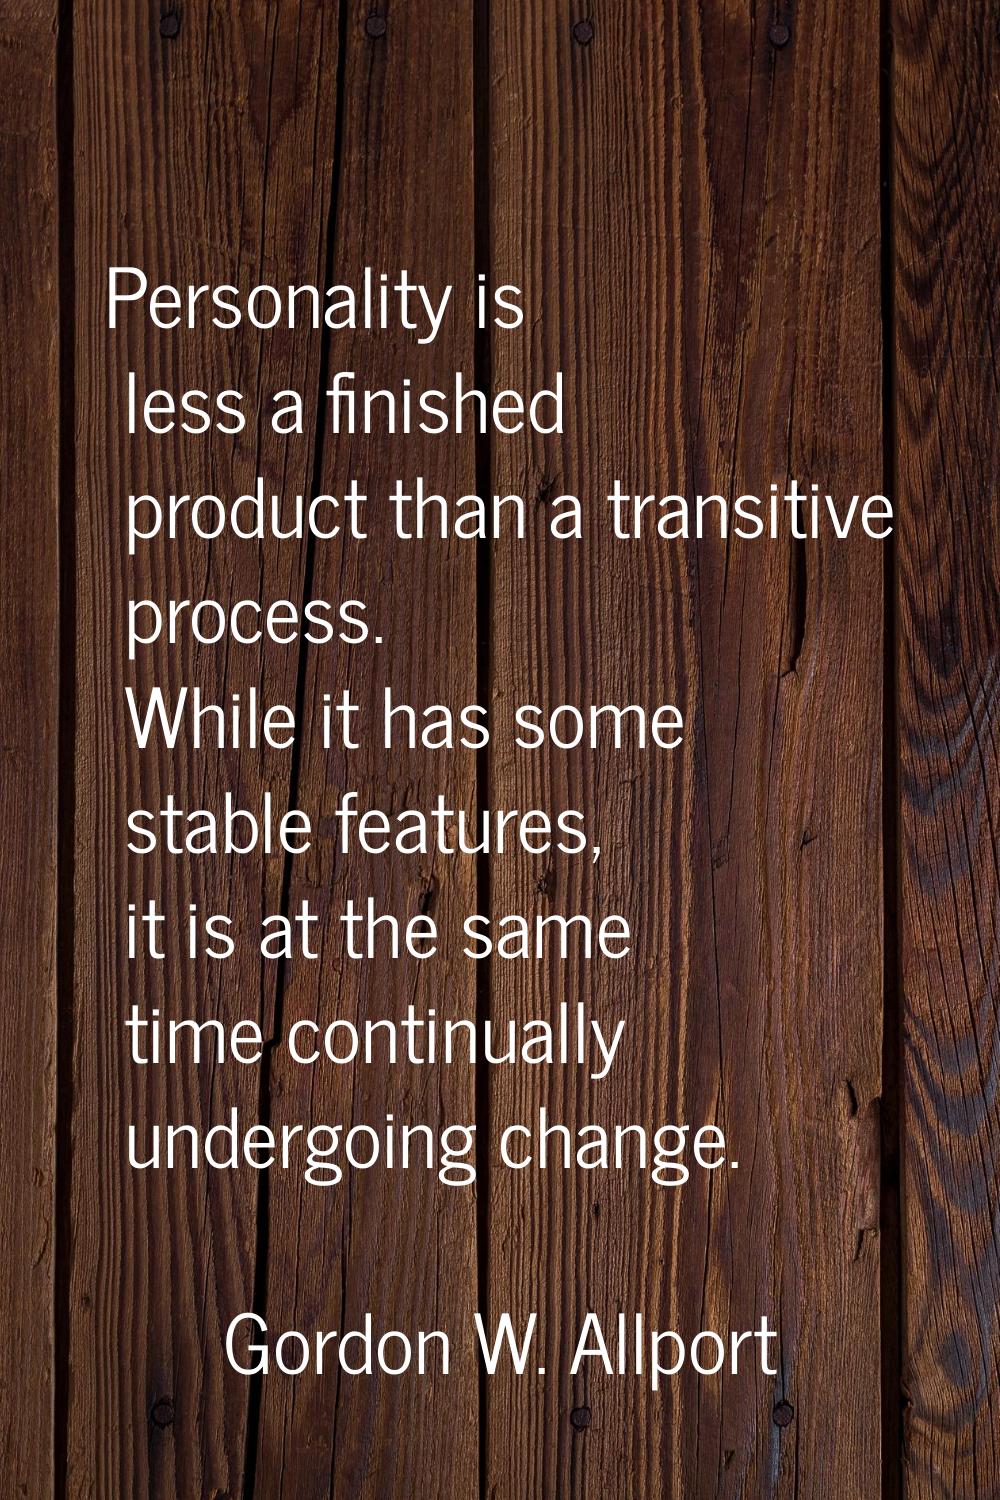 Personality is less a finished product than a transitive process. While it has some stable features